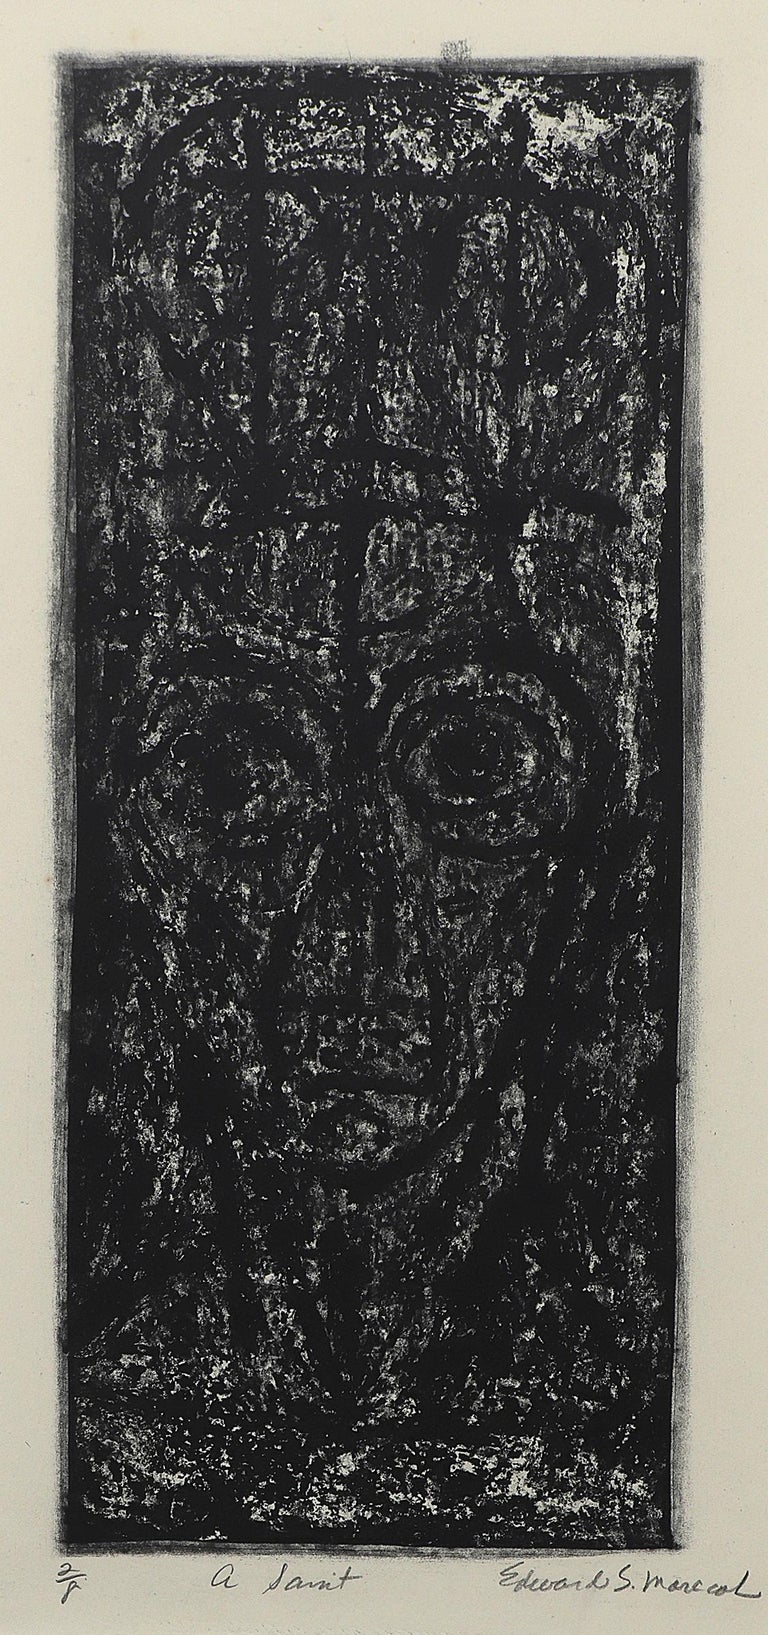 A Saint (2/8), Lithograph on Paper of a Figured Head, Black and White - Print by Edward Marecak